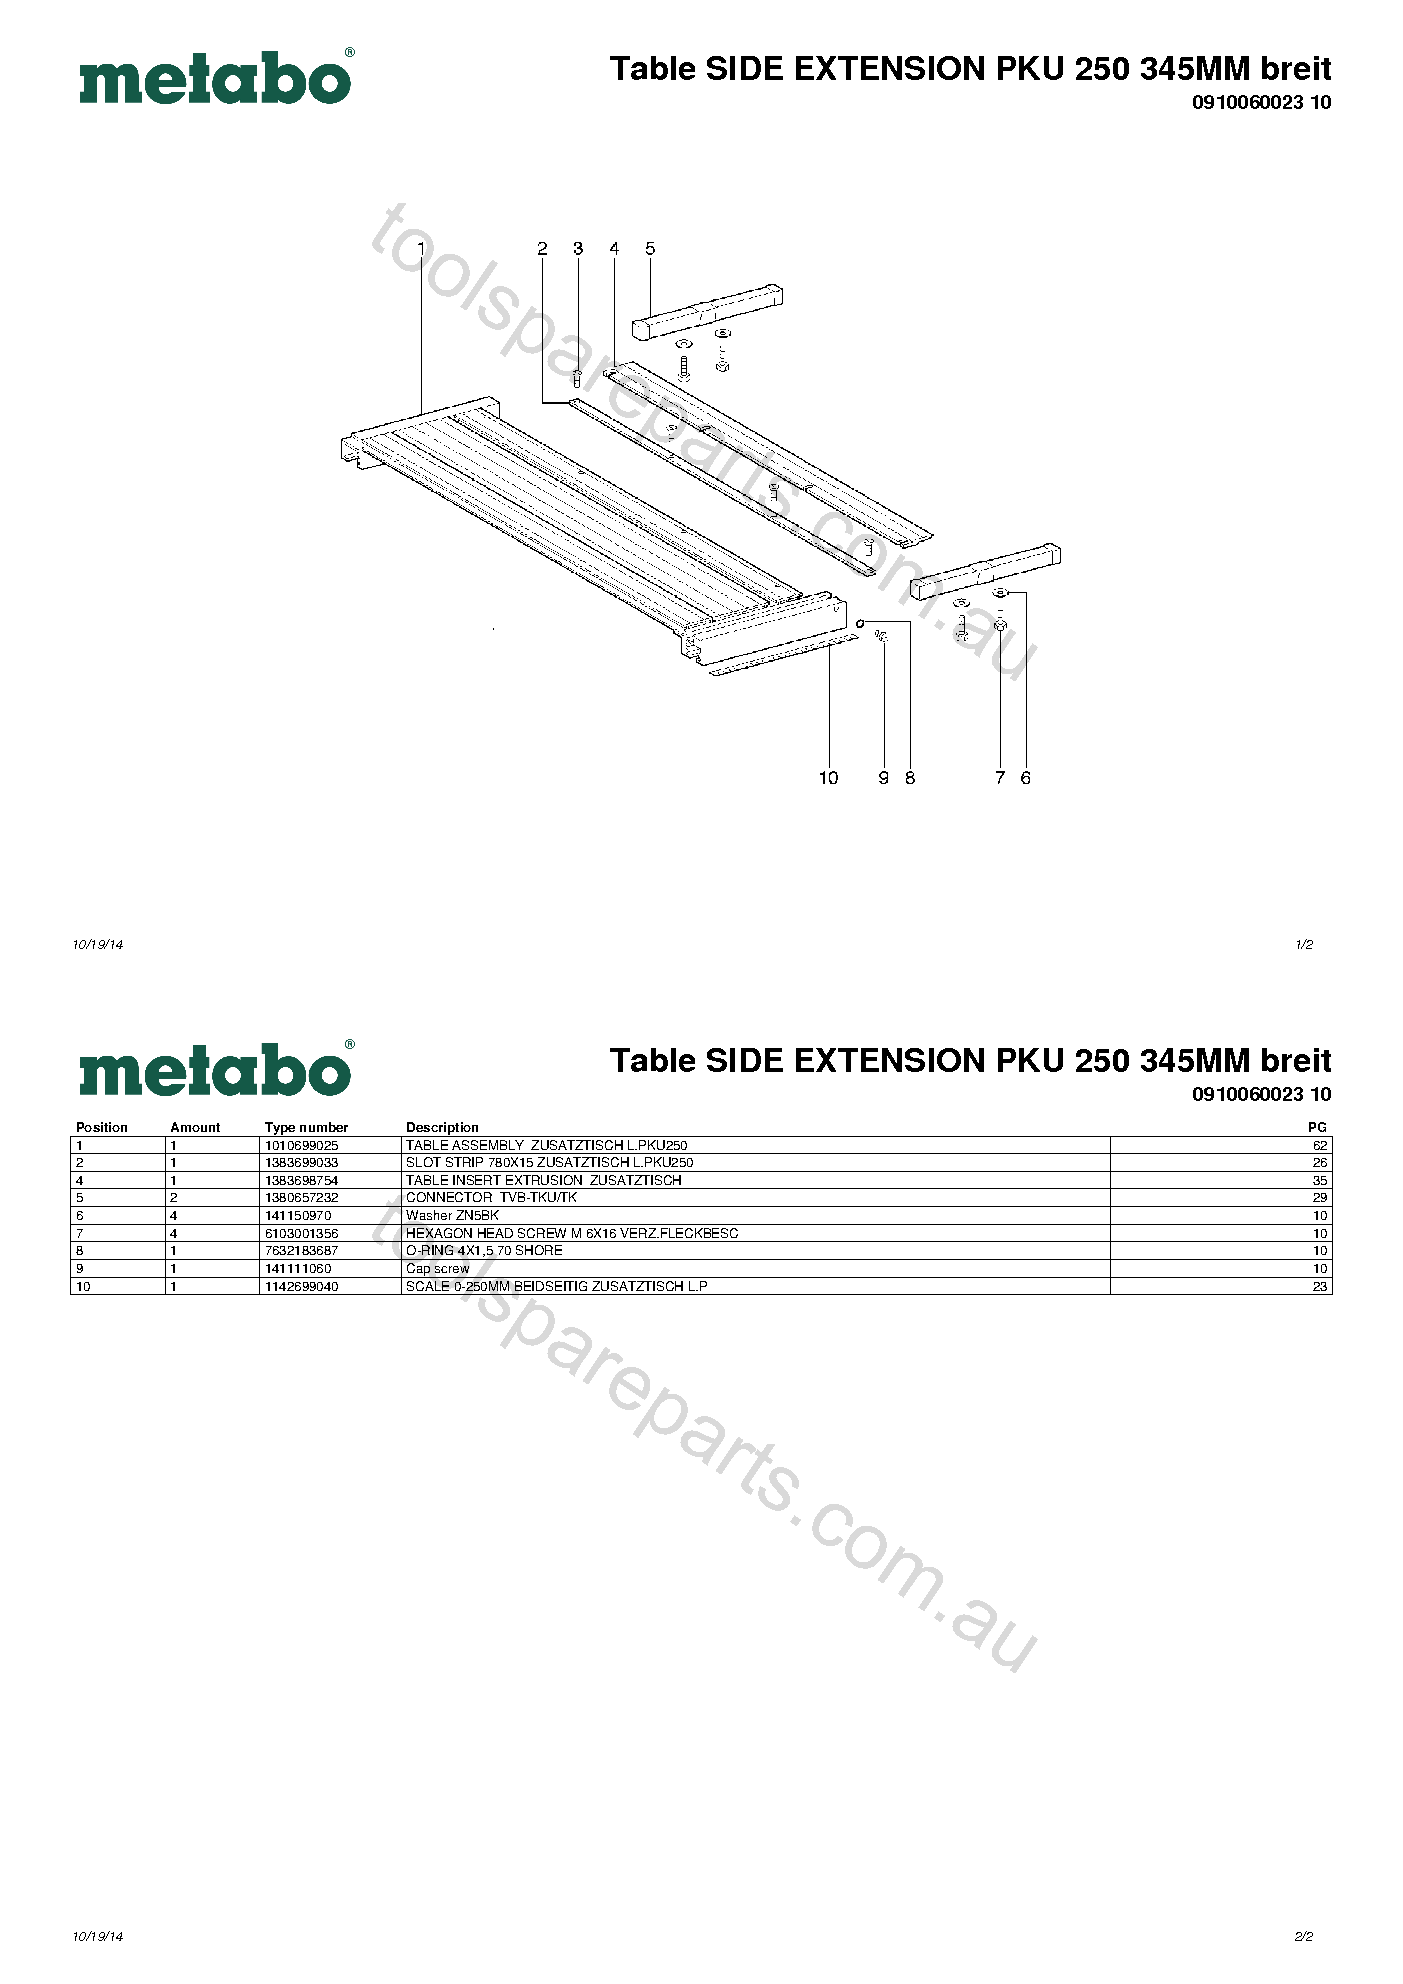 Metabo Table SIDE EXTENSION PKU 250 345MM breit 0910060023 10  Diagram 1